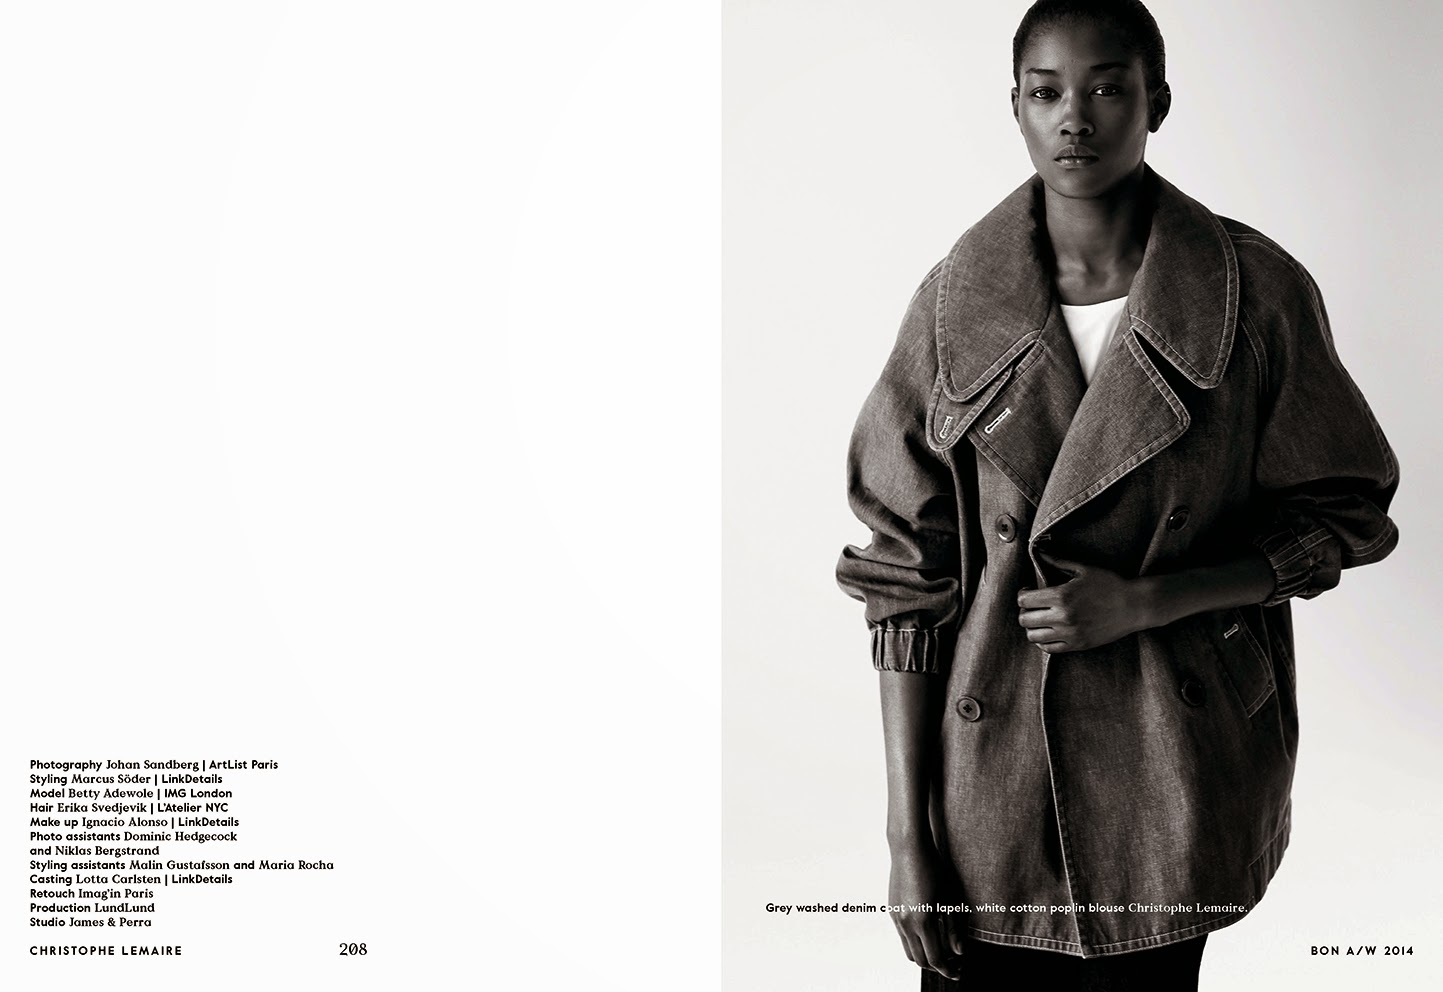 TE DORE: CHRISTOPHE LEMAIRE AND SARAH-LINH TRAN INTERVIEW FOR BON MAGAZINE